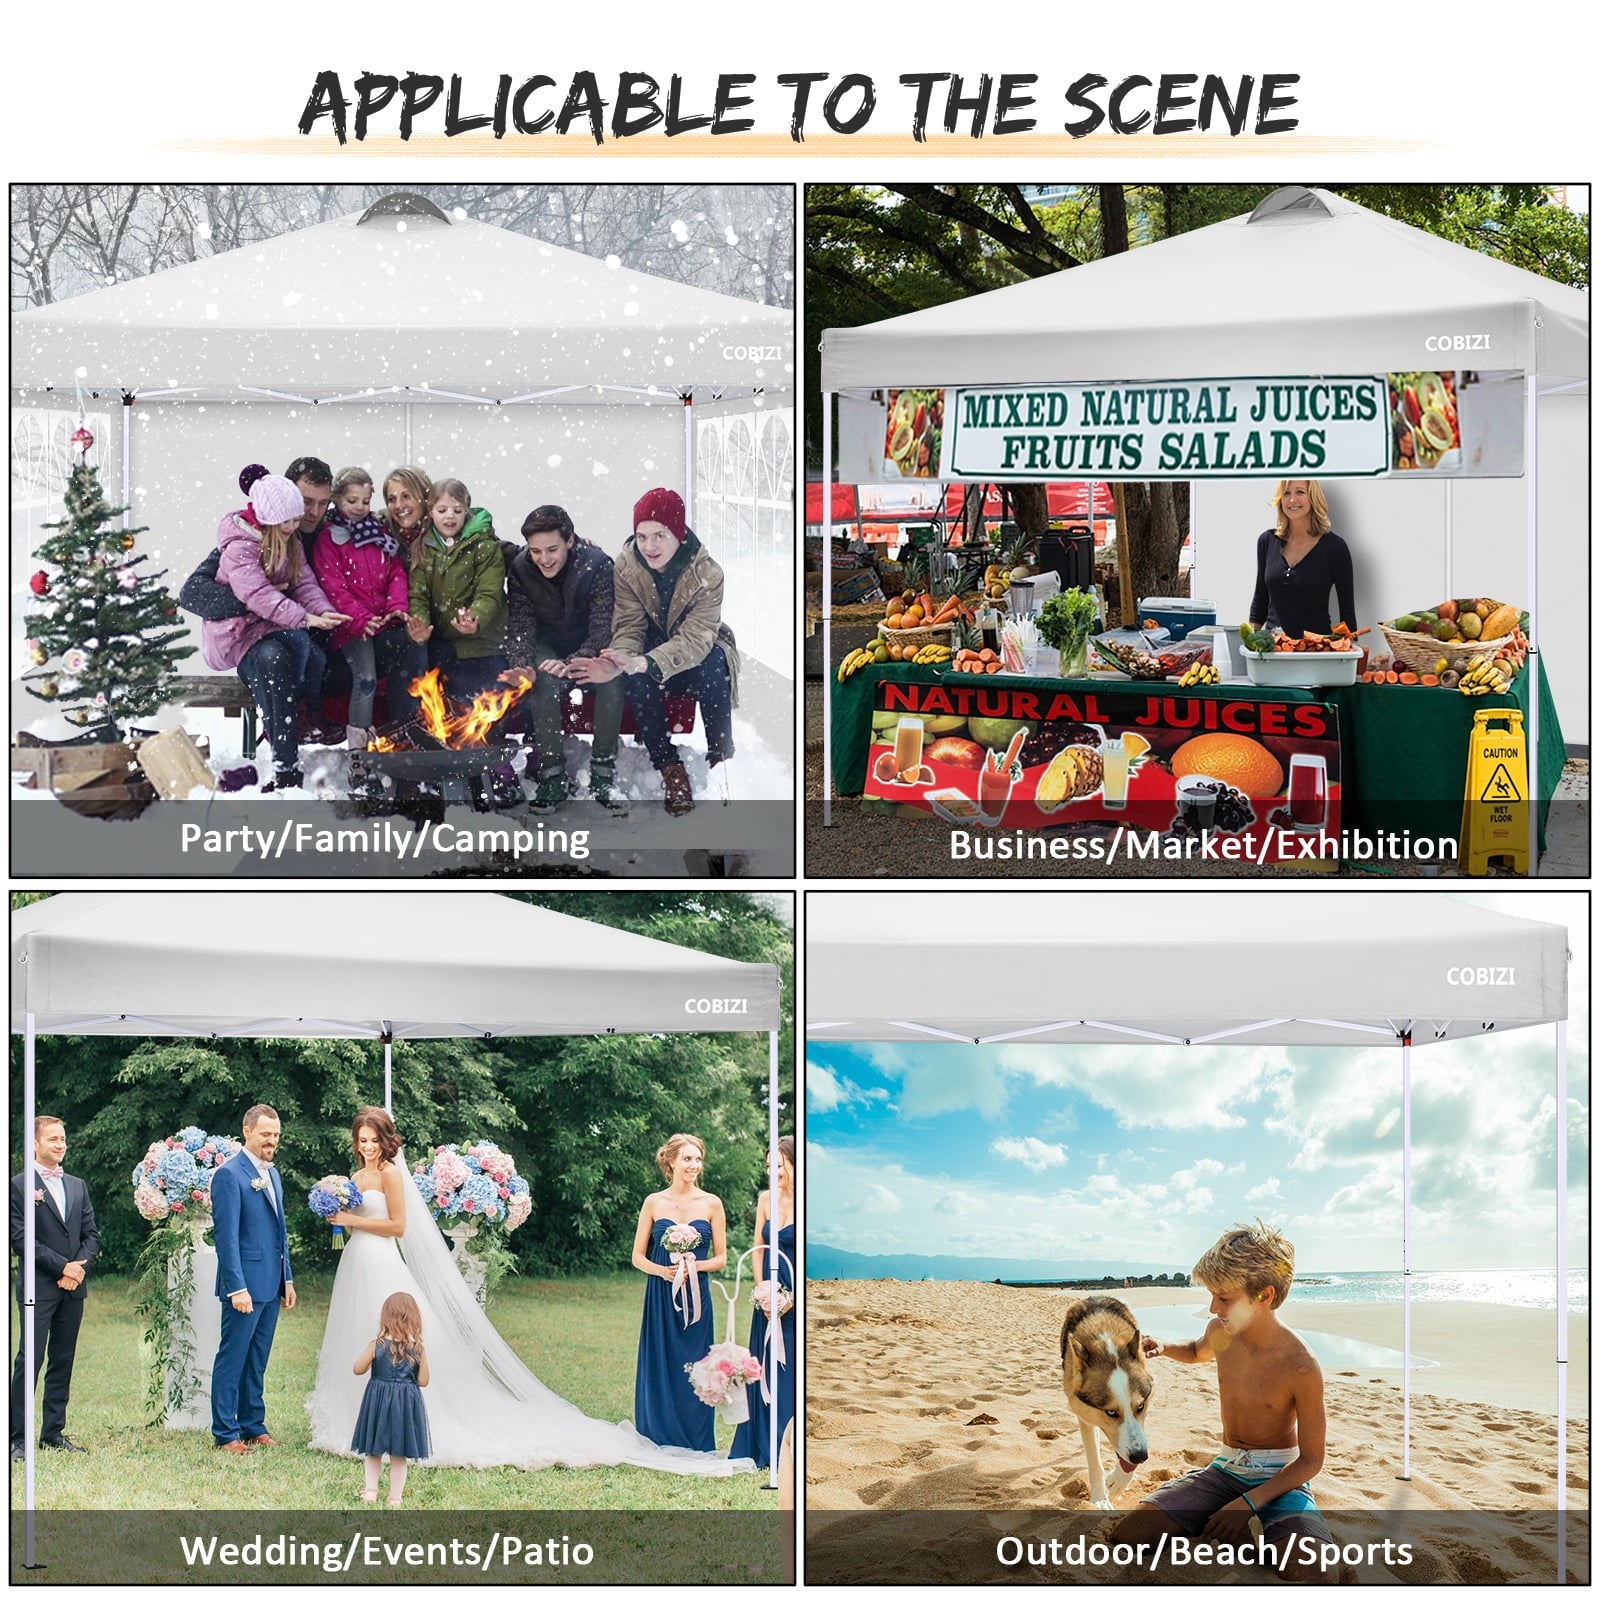 10 x 10ft Pop Up Canopy Tent Instant Outdoor Party Canopy Straight Leg Commercial Gazebo Tent Shelter with 4 Removable Sidewalls & Carrying Bag & 4 Sandbags, White